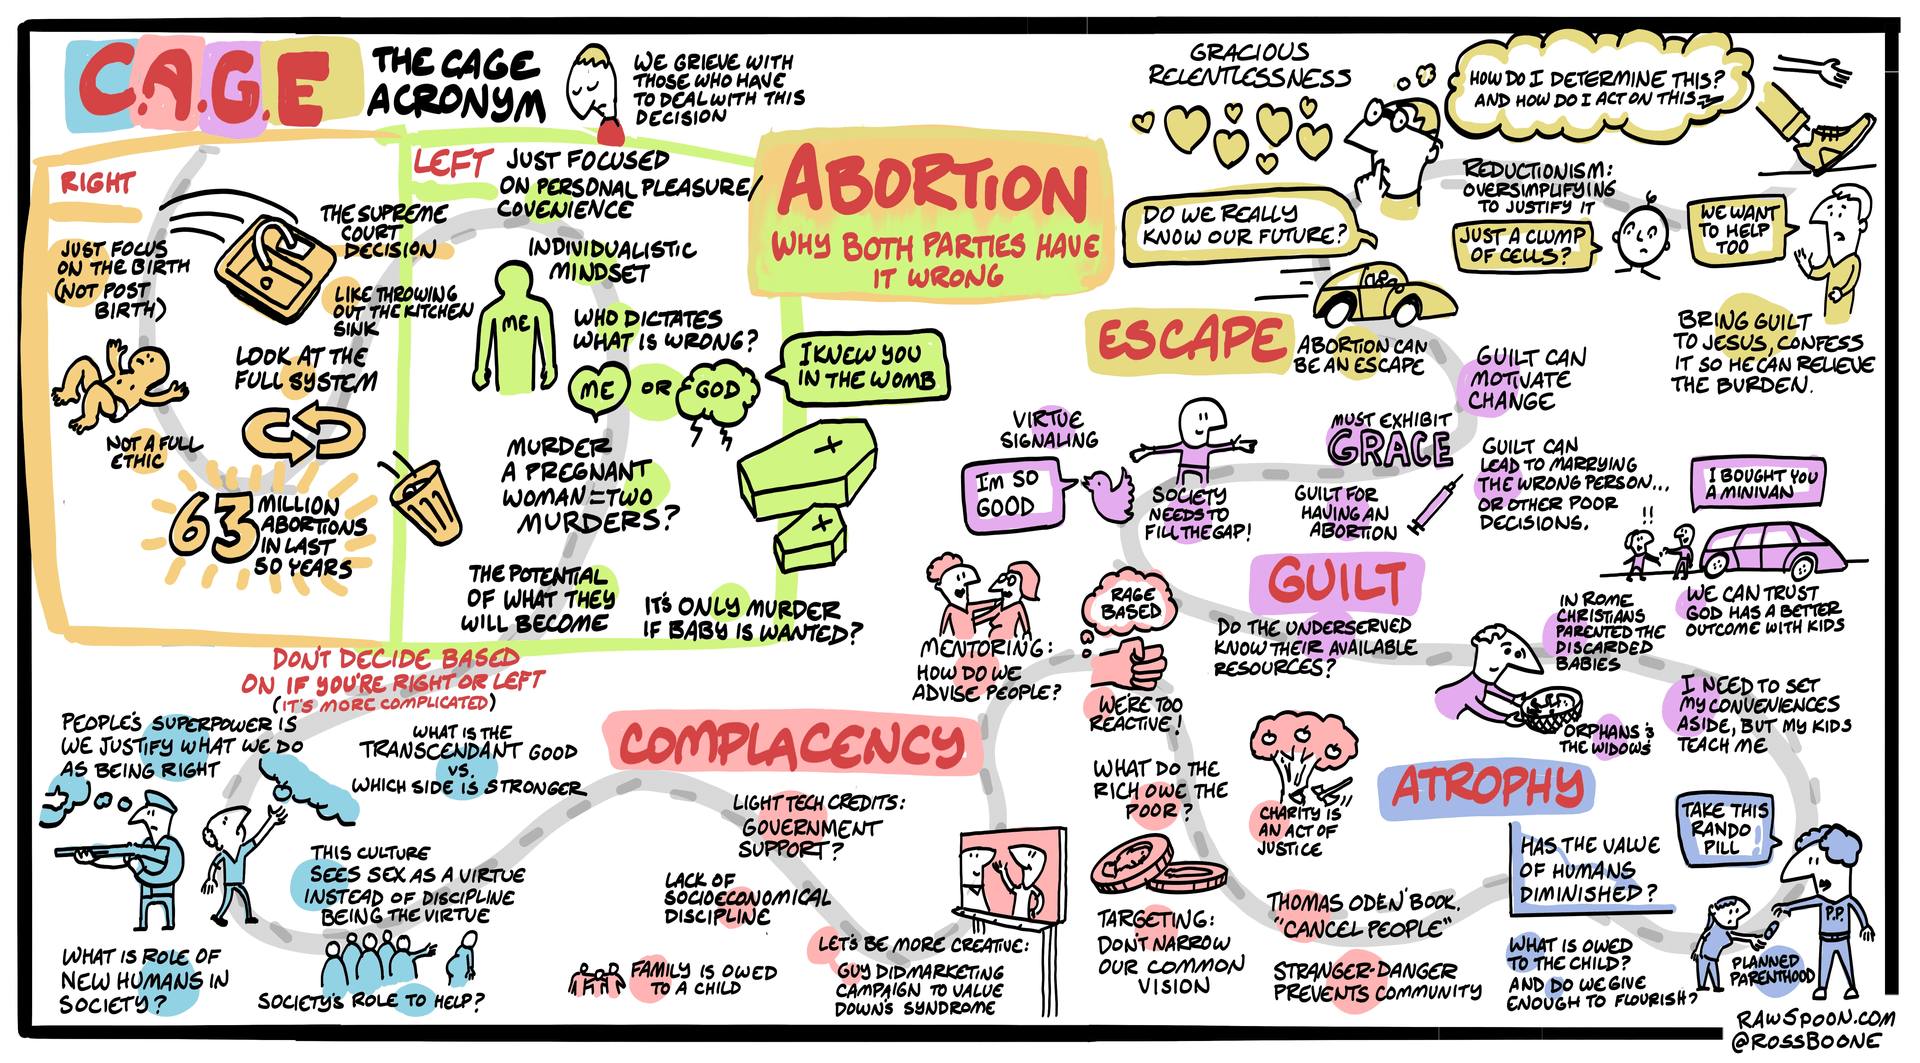 ross boon doodle graphic of abortion conversation